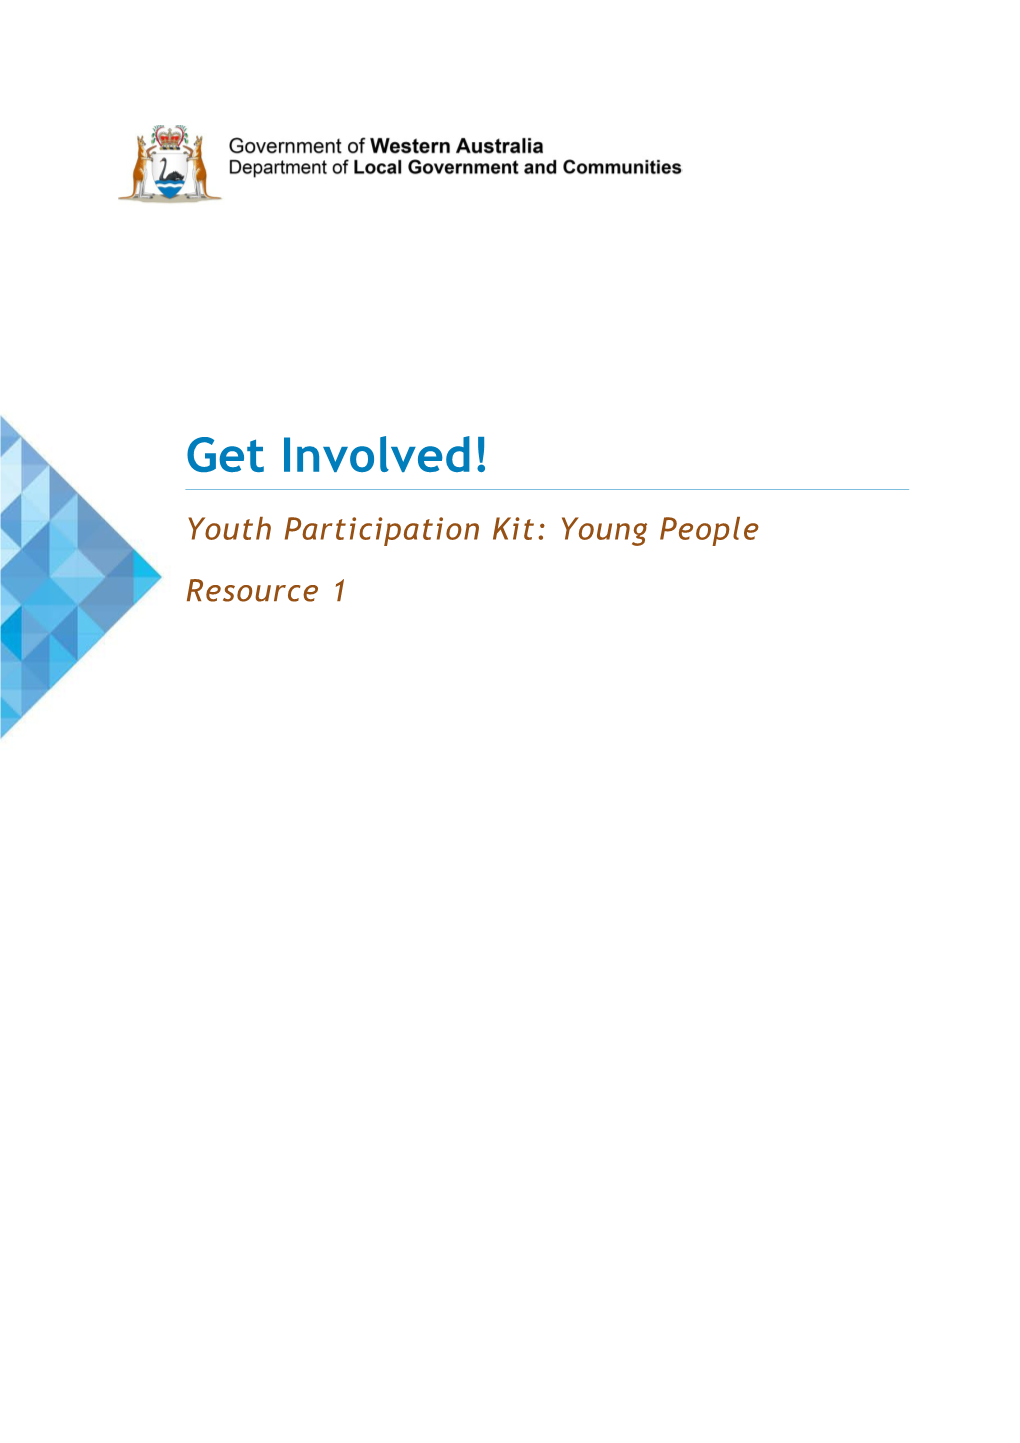 Youth Participation Kit: Young People - Resource 1 - Get Involved!